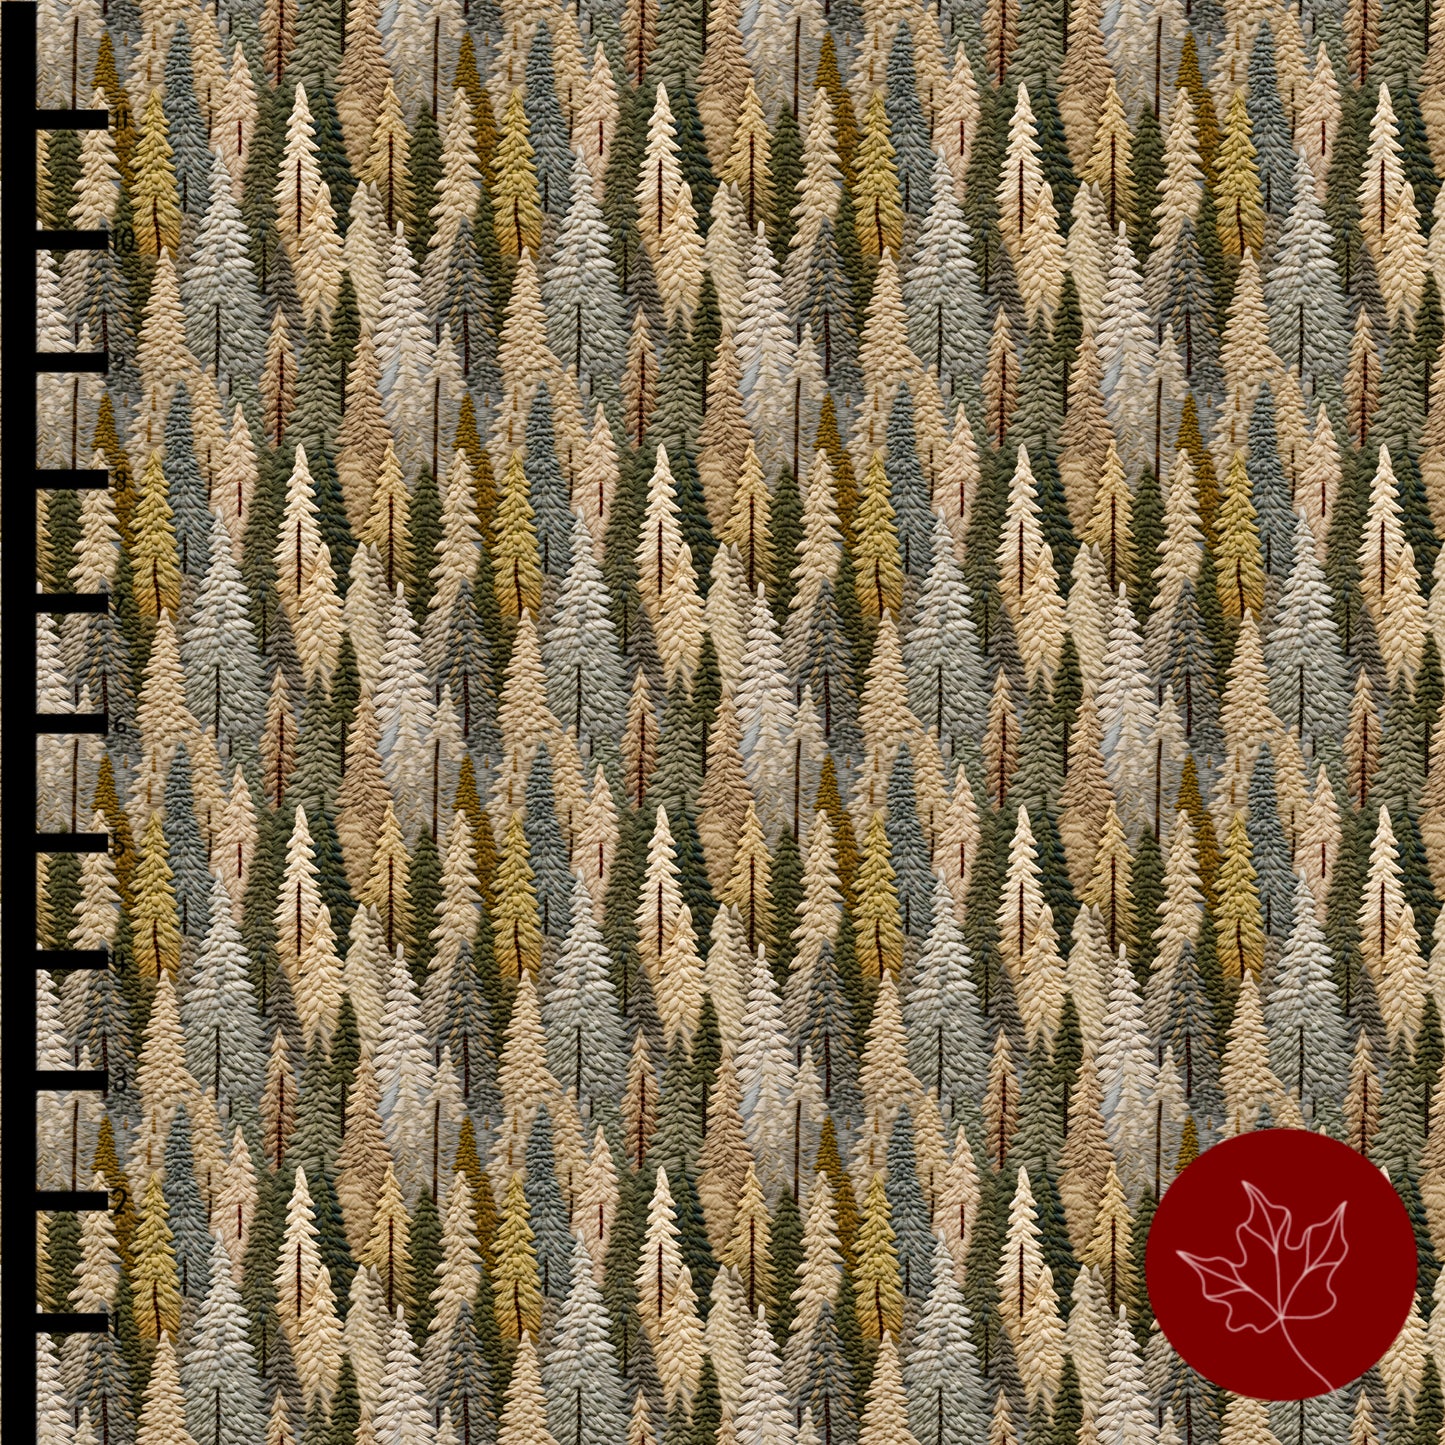 Forest embroidery